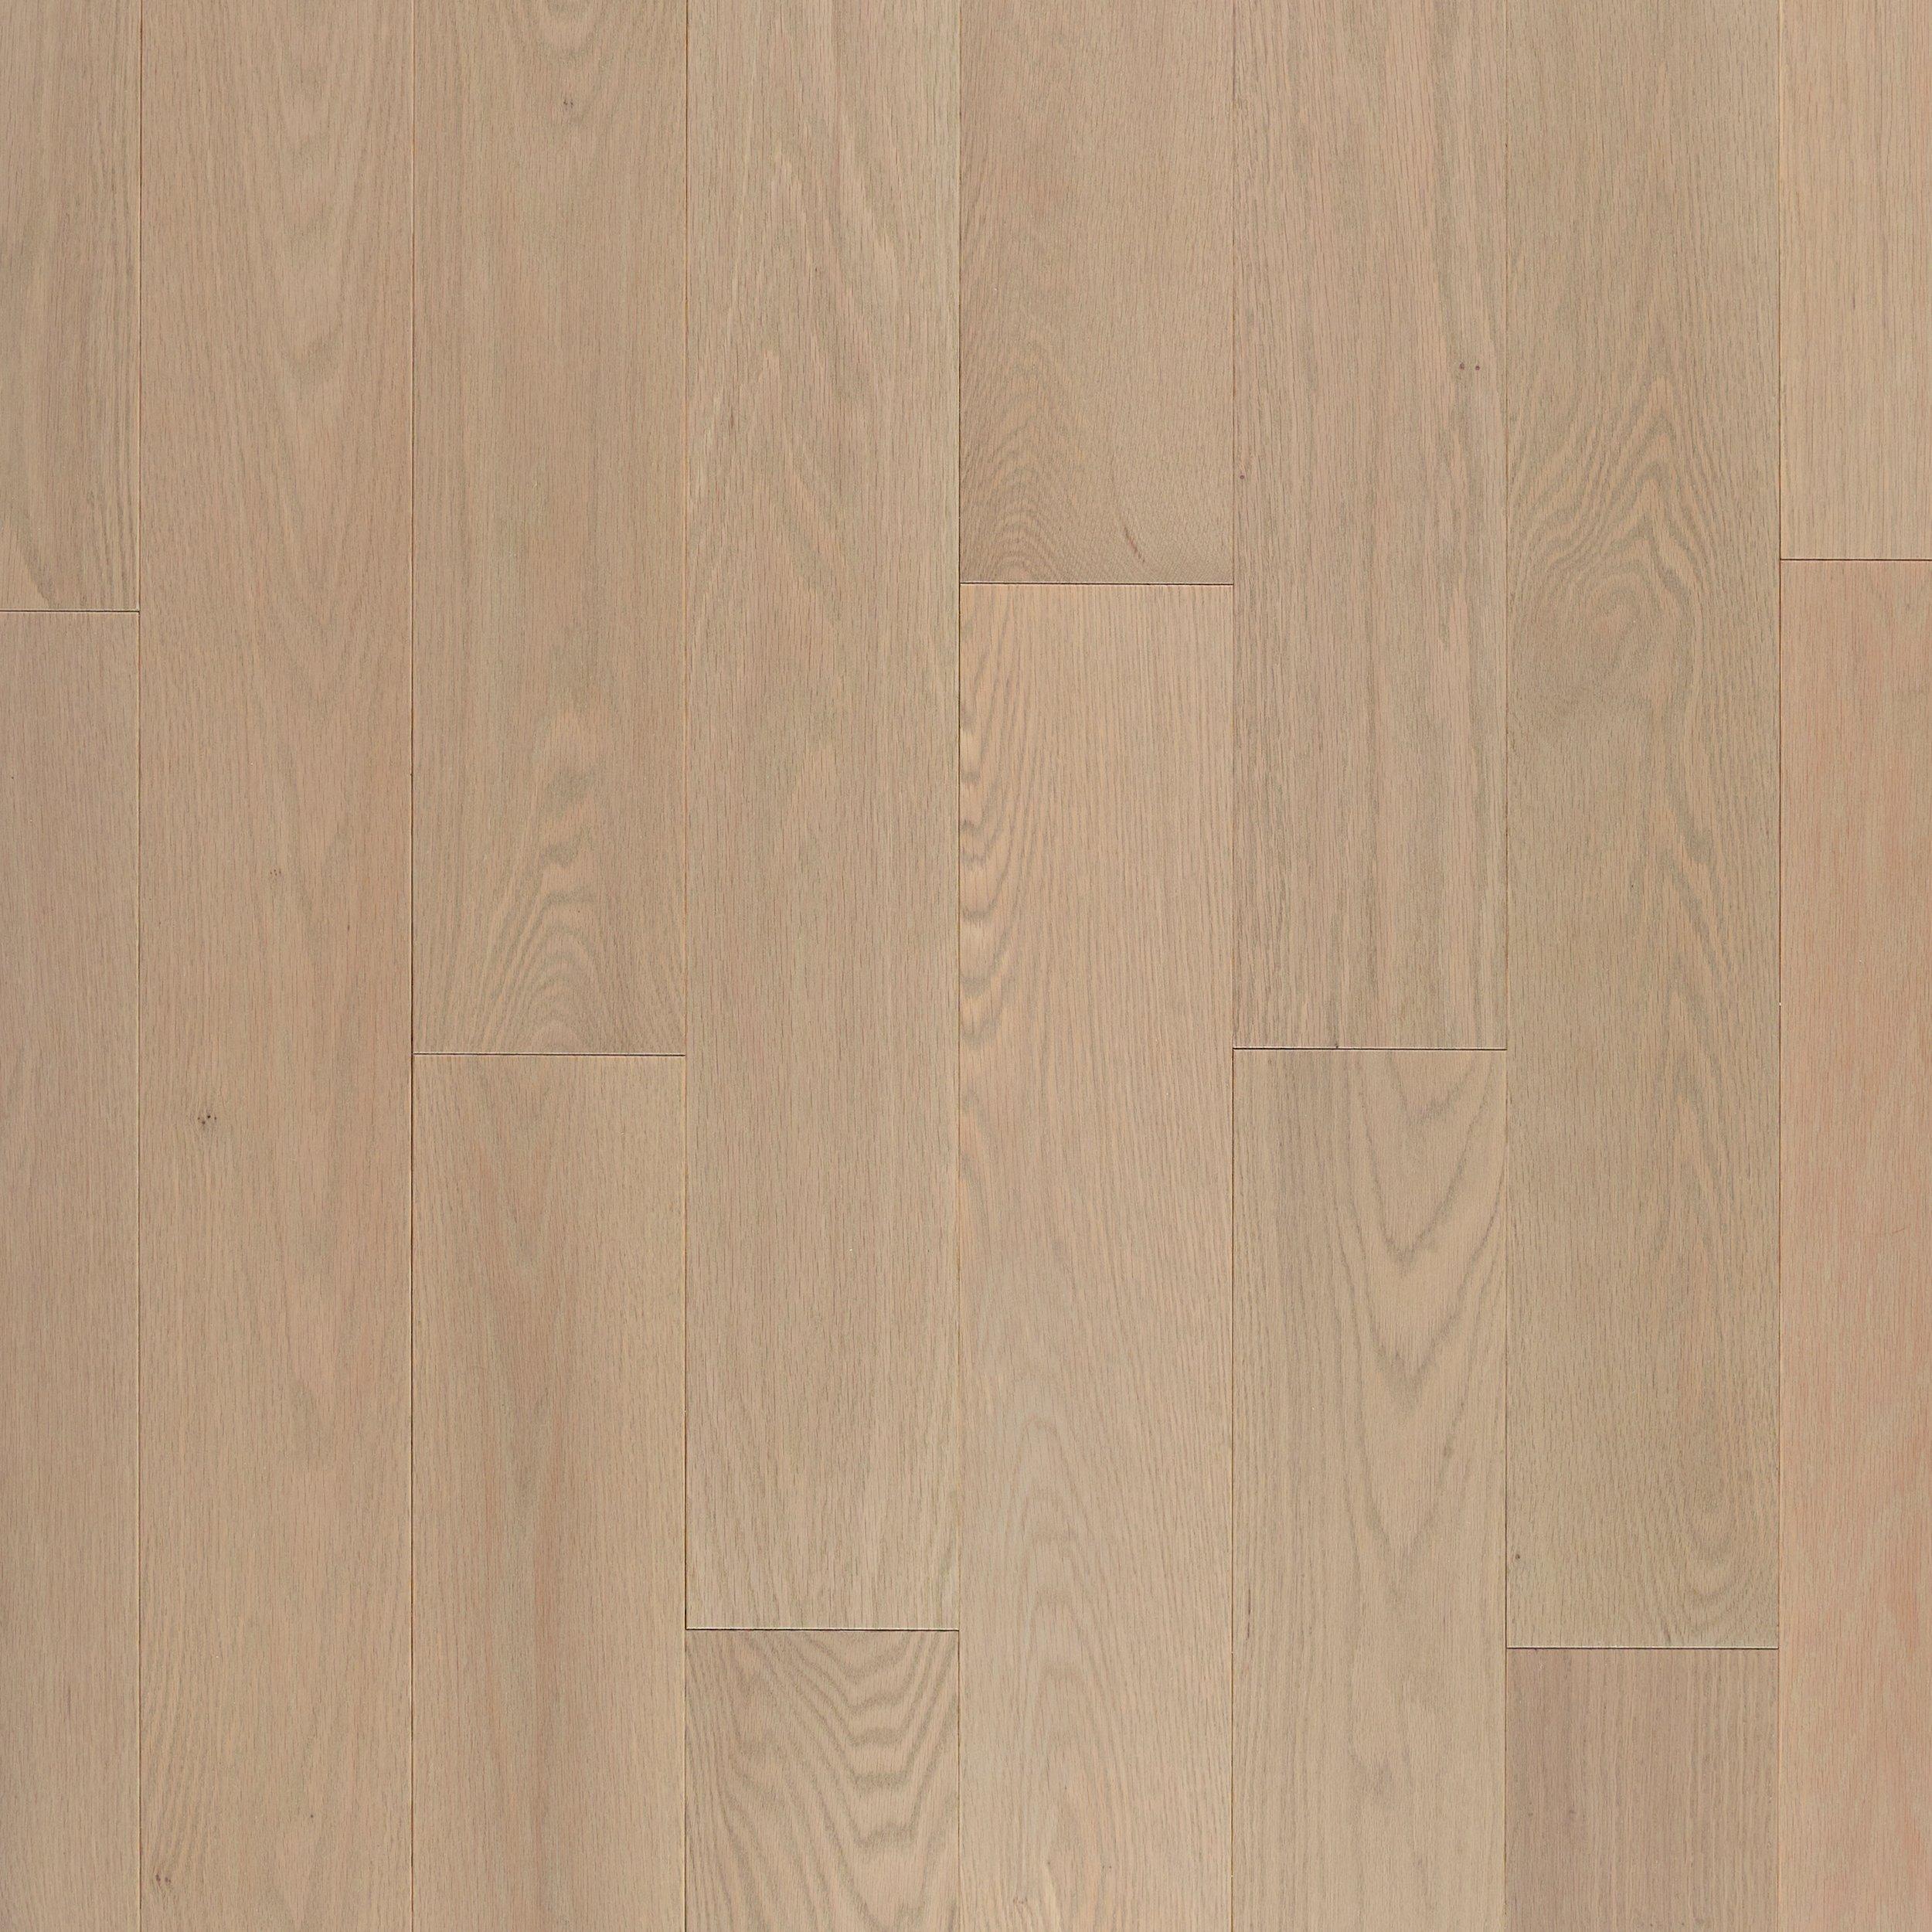 Honora Red Oak Smooth Solid Hardwood